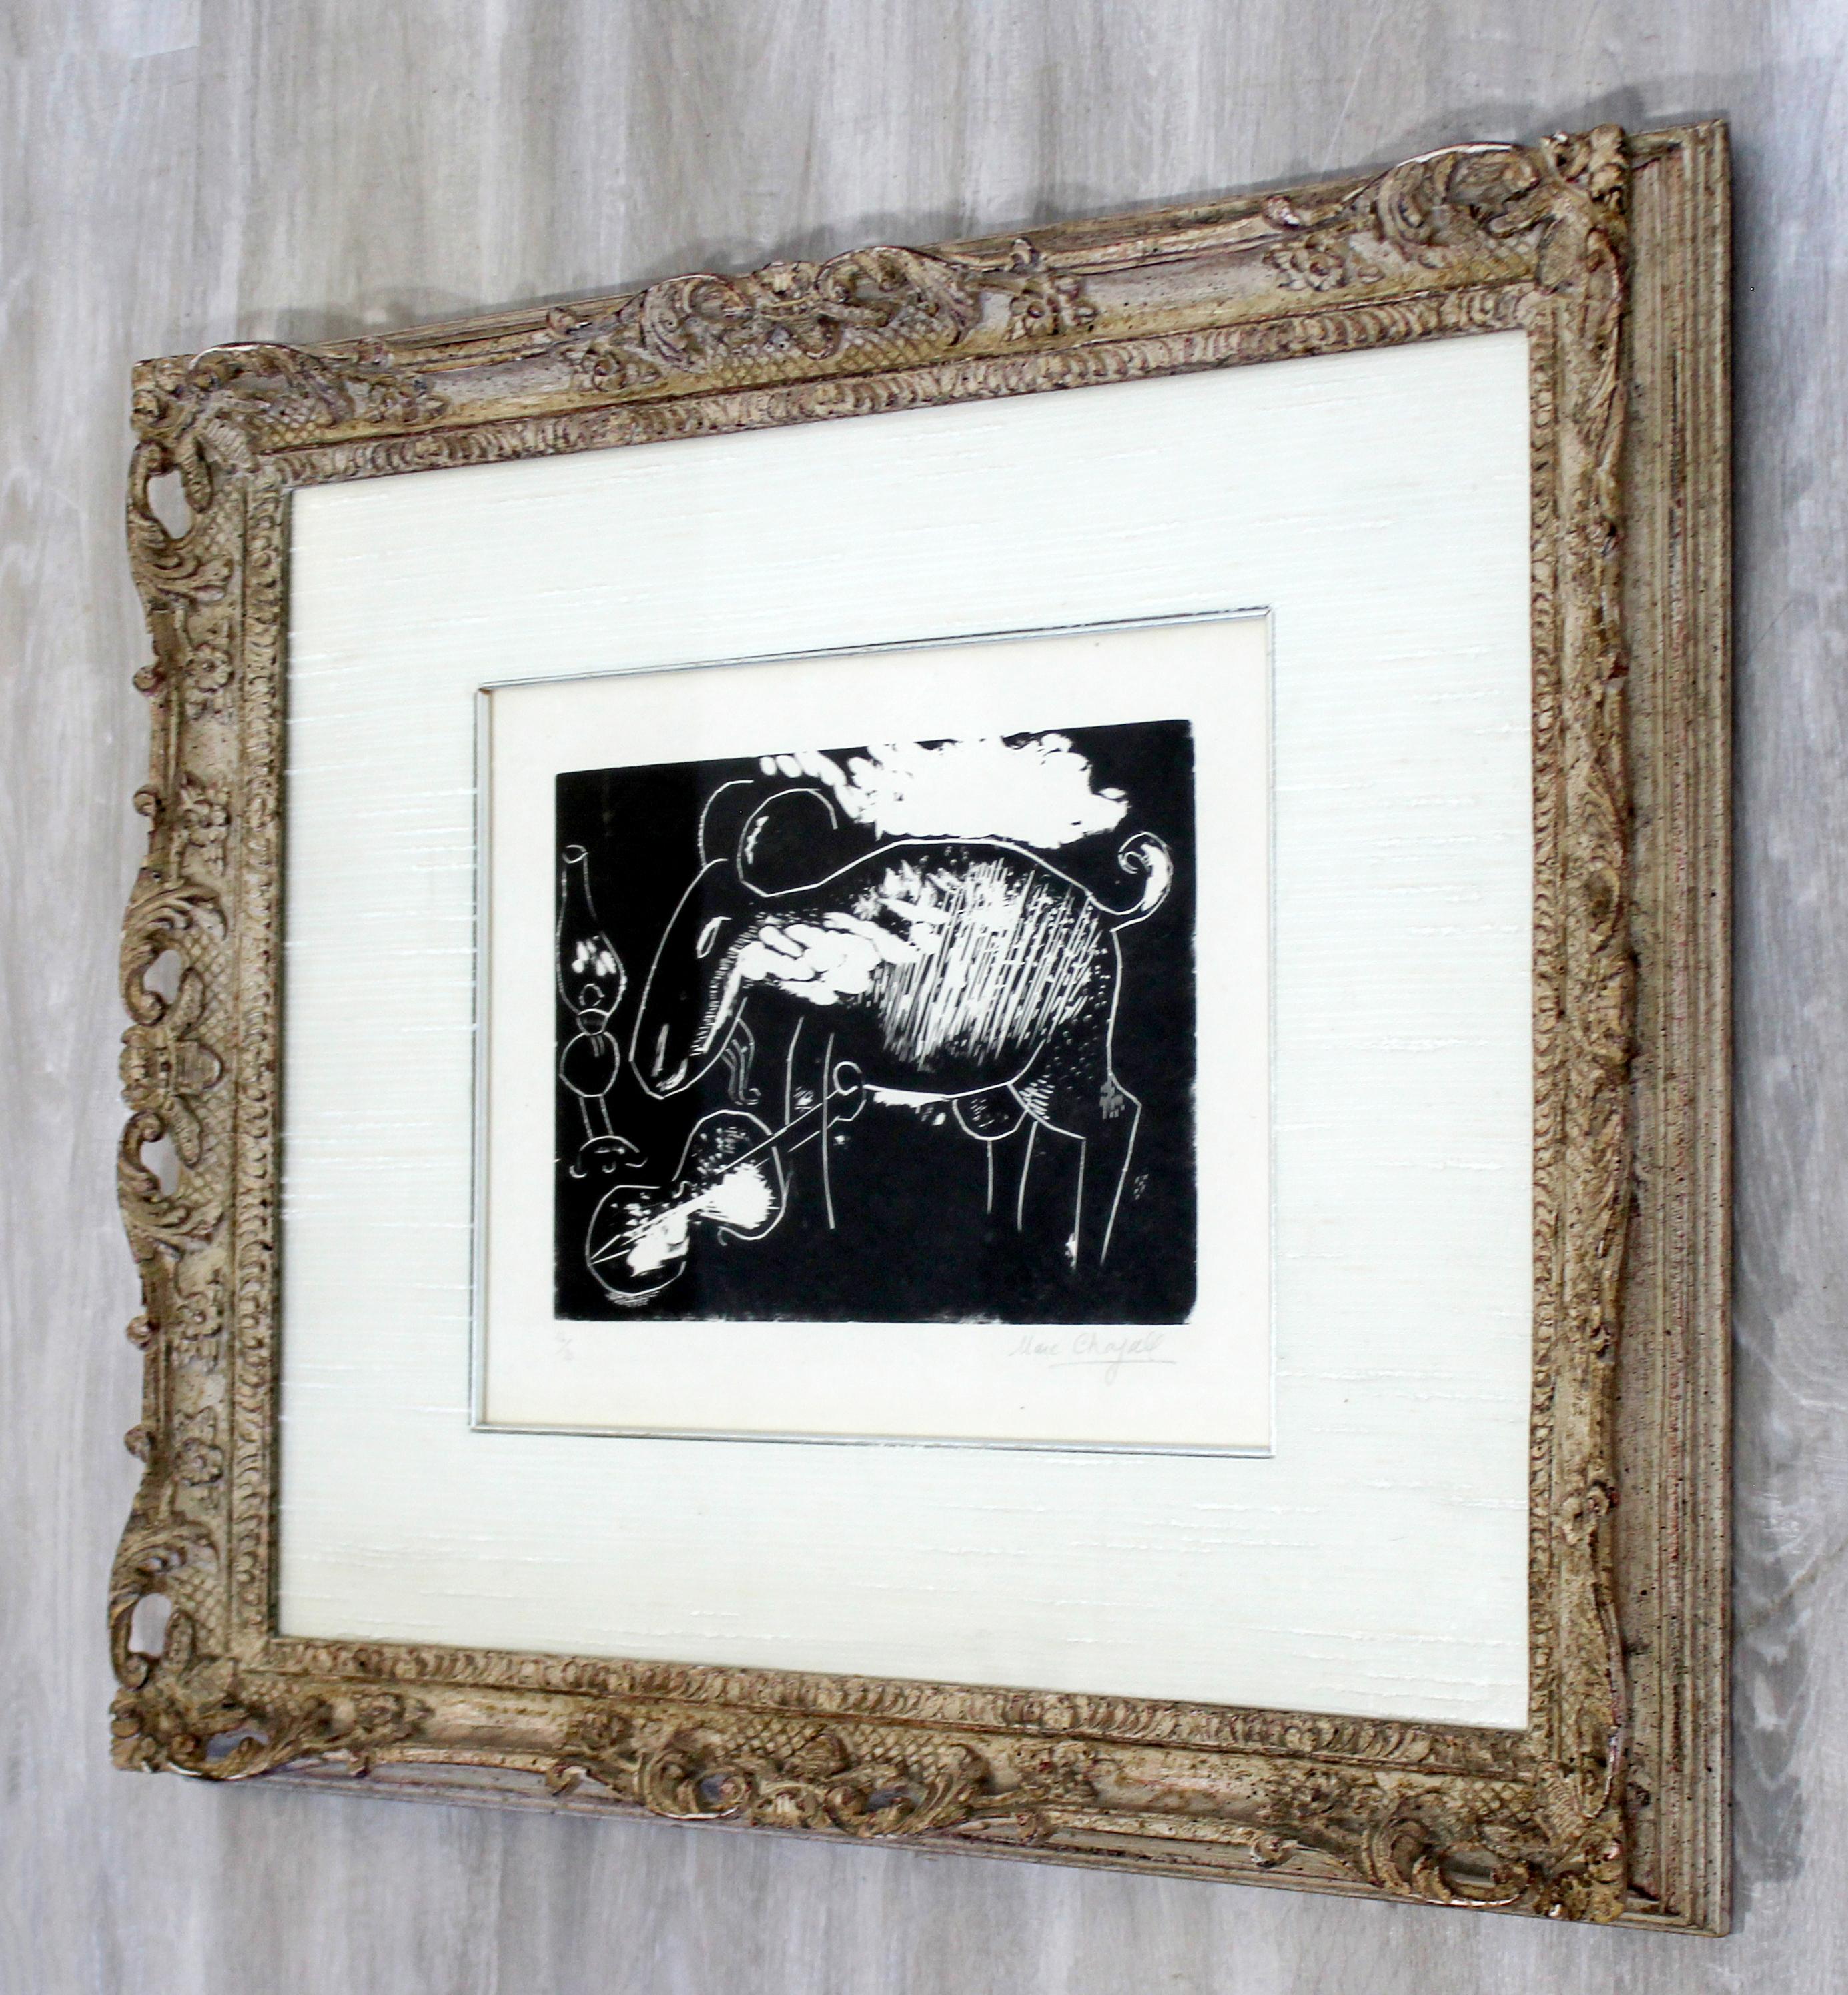 Early 20th Century Ziege Mit Geige a Framed Woodcut by Marc Chagall Signed and Numbered 12/20 For Sale